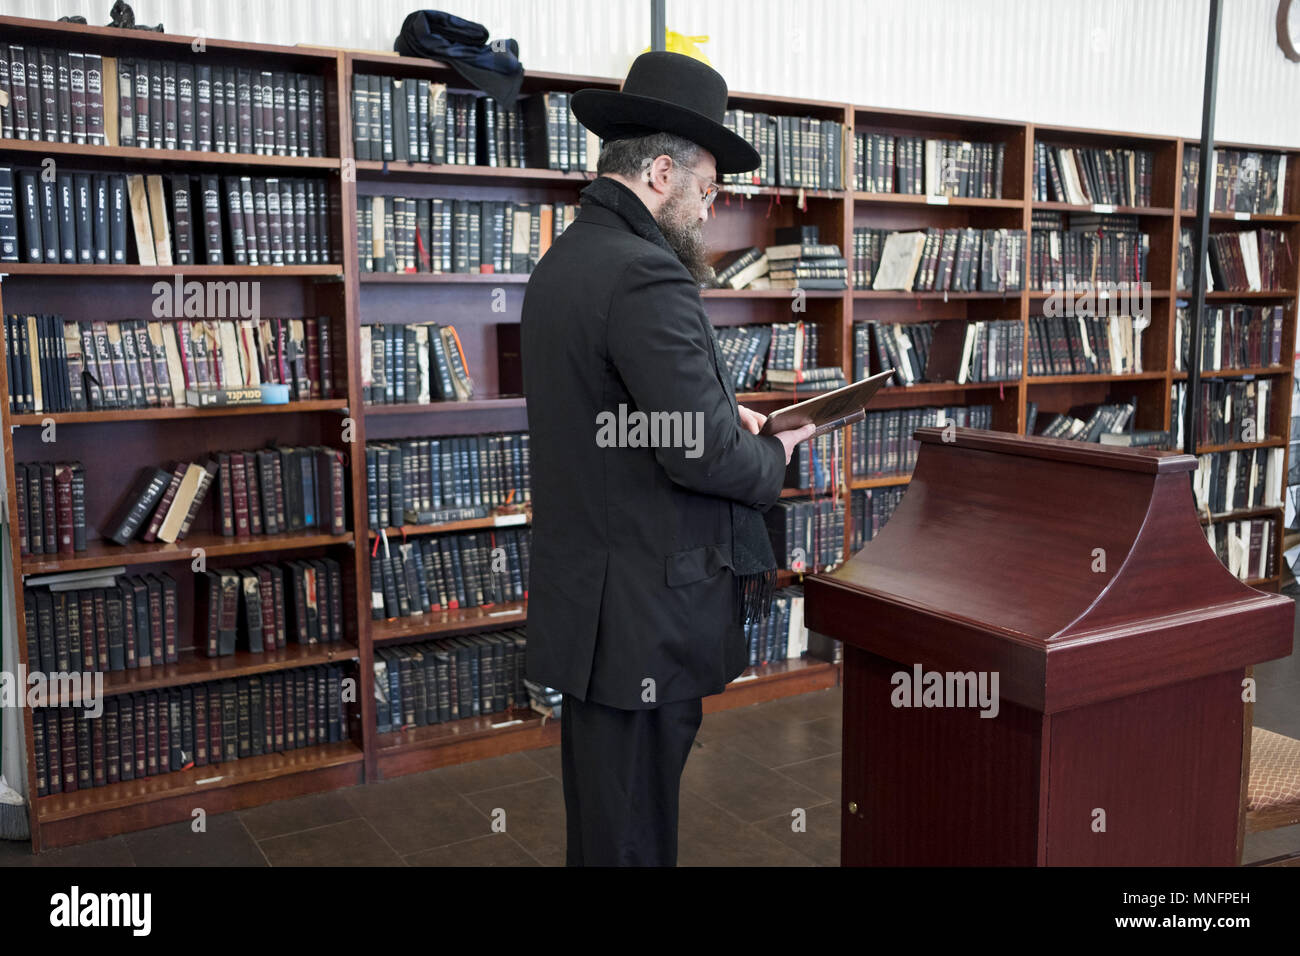 An orthodox Jewish man dressed in black praying at a synagogue in Cambria Heights, Queens, New York City. Stock Photo